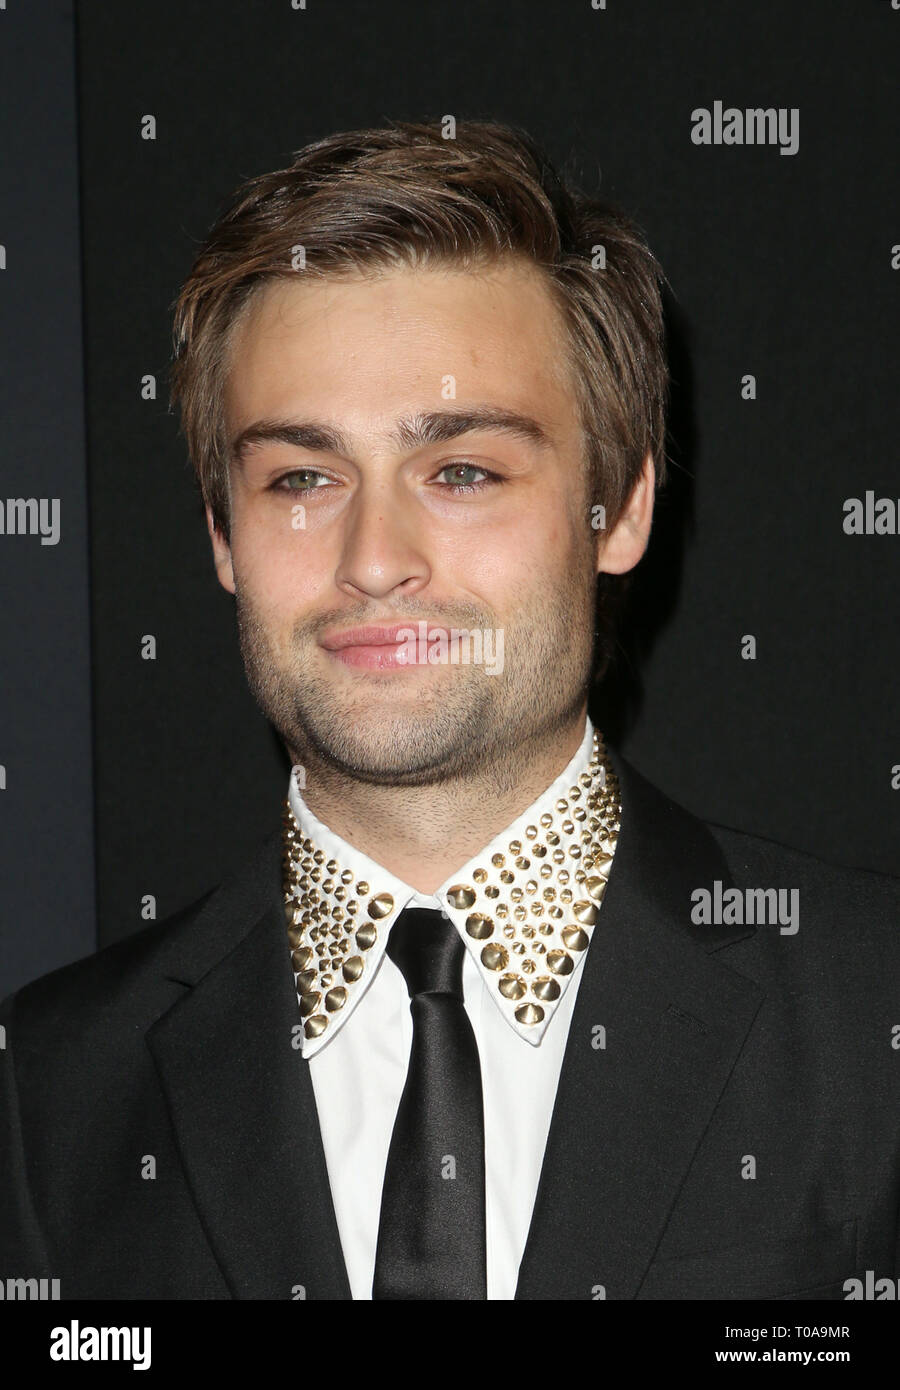 Los Angeles, Ca, USA. 18th Mar, 2019. Douglas Booth, at the NETFLIX premiere of The Dirt at The ArcLight Hollywood in Los Angeles, California on March 18, 2019. Credit: Faye Sadou/Media Punch/Alamy Live News Stock Photo